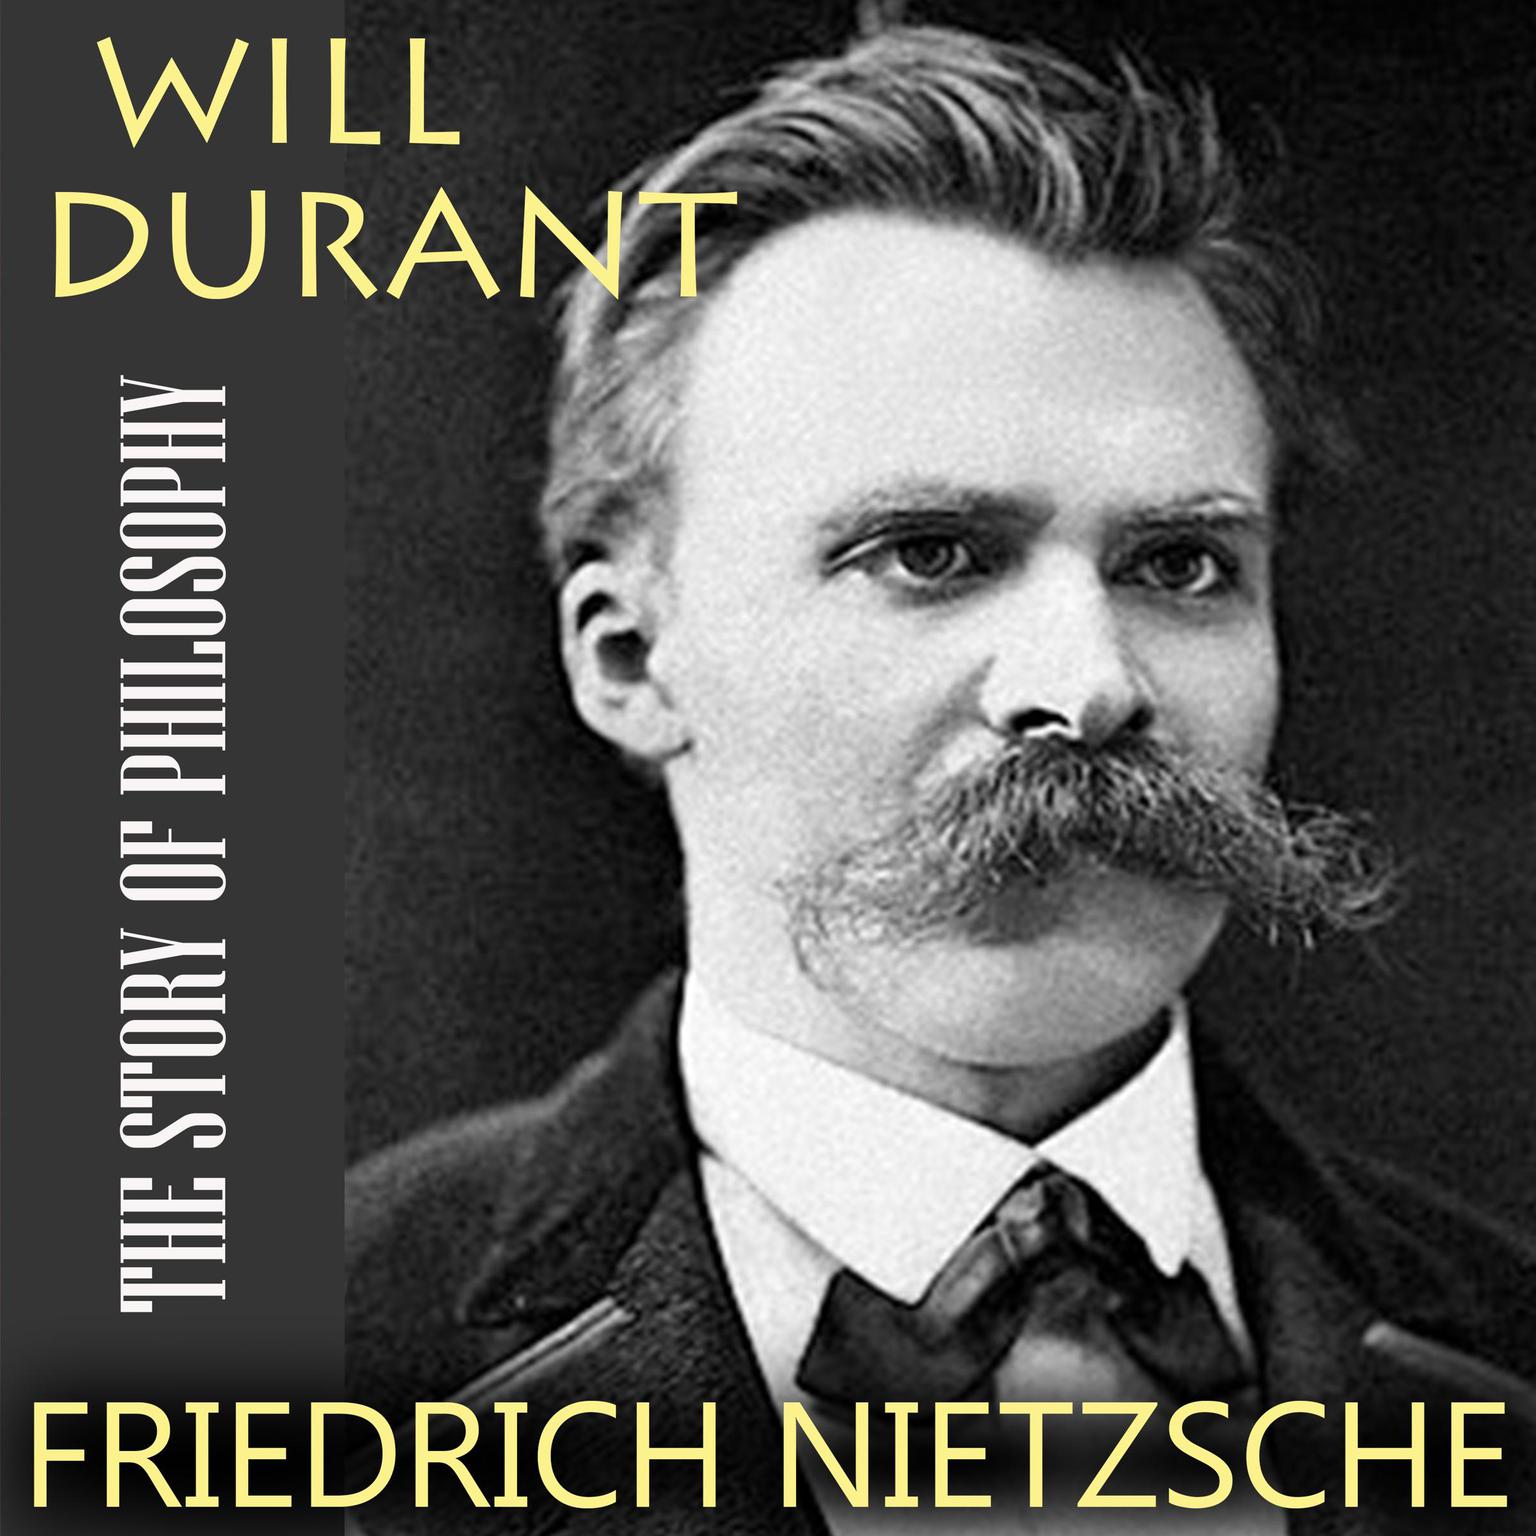 The Story of Philosophy. Friedrich Nietzsche Audiobook, by Will Durant